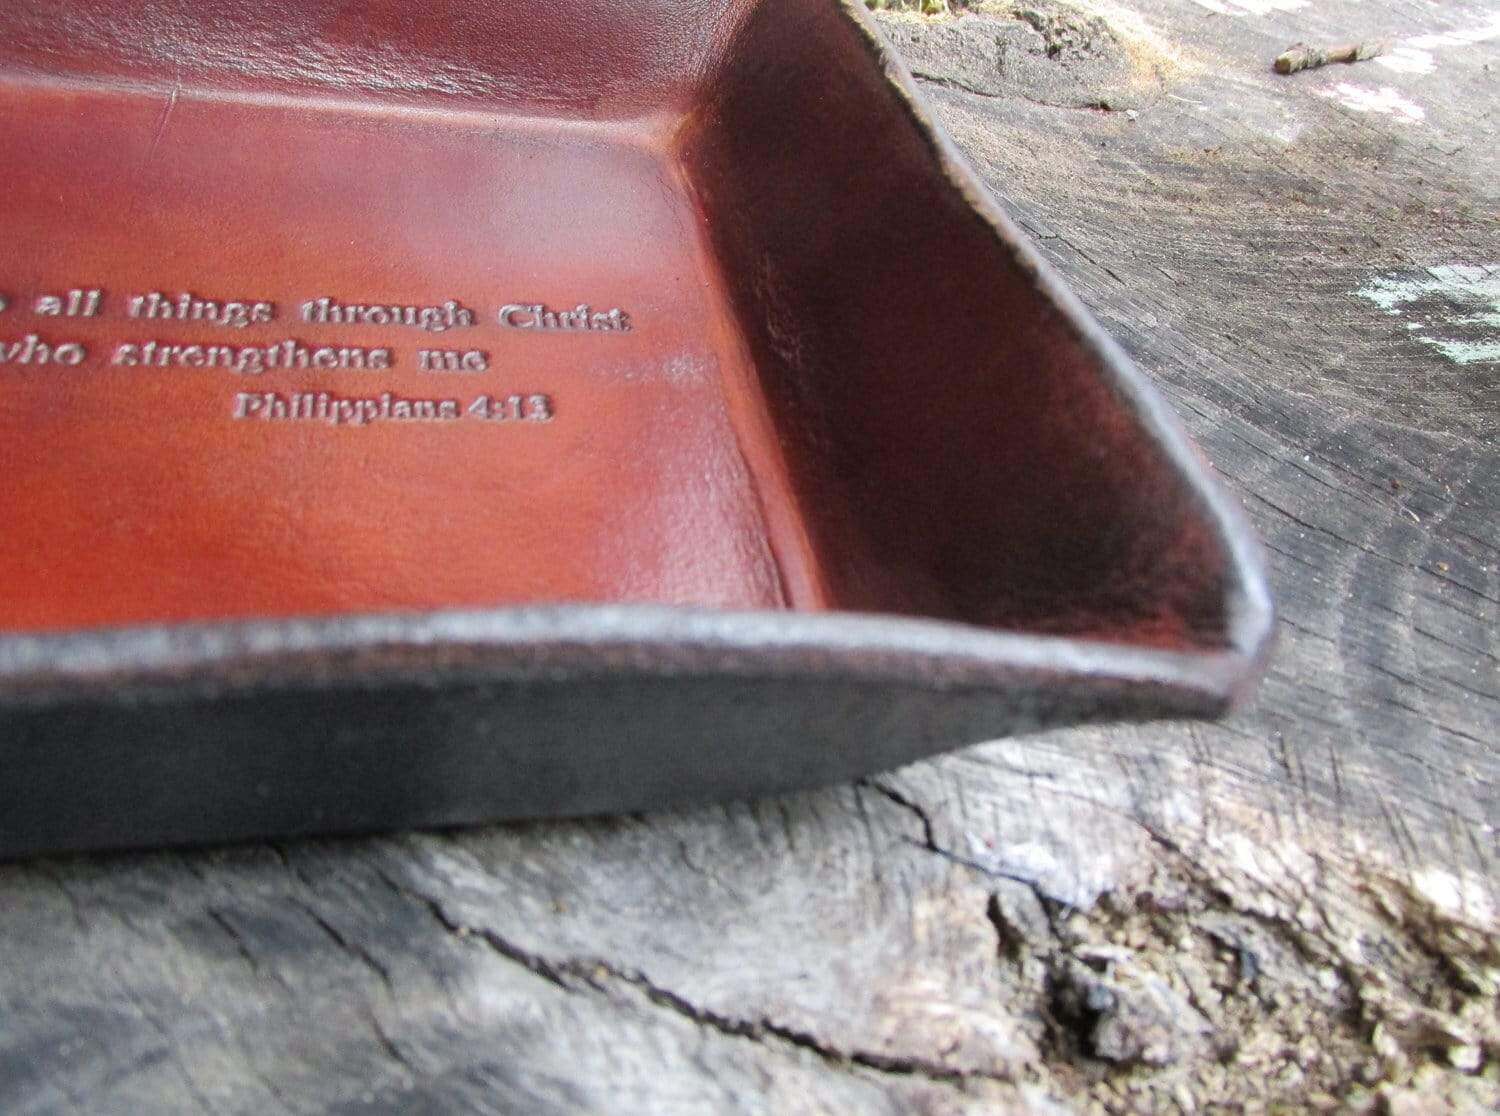 Philippians 4:13 leather tray side detail.